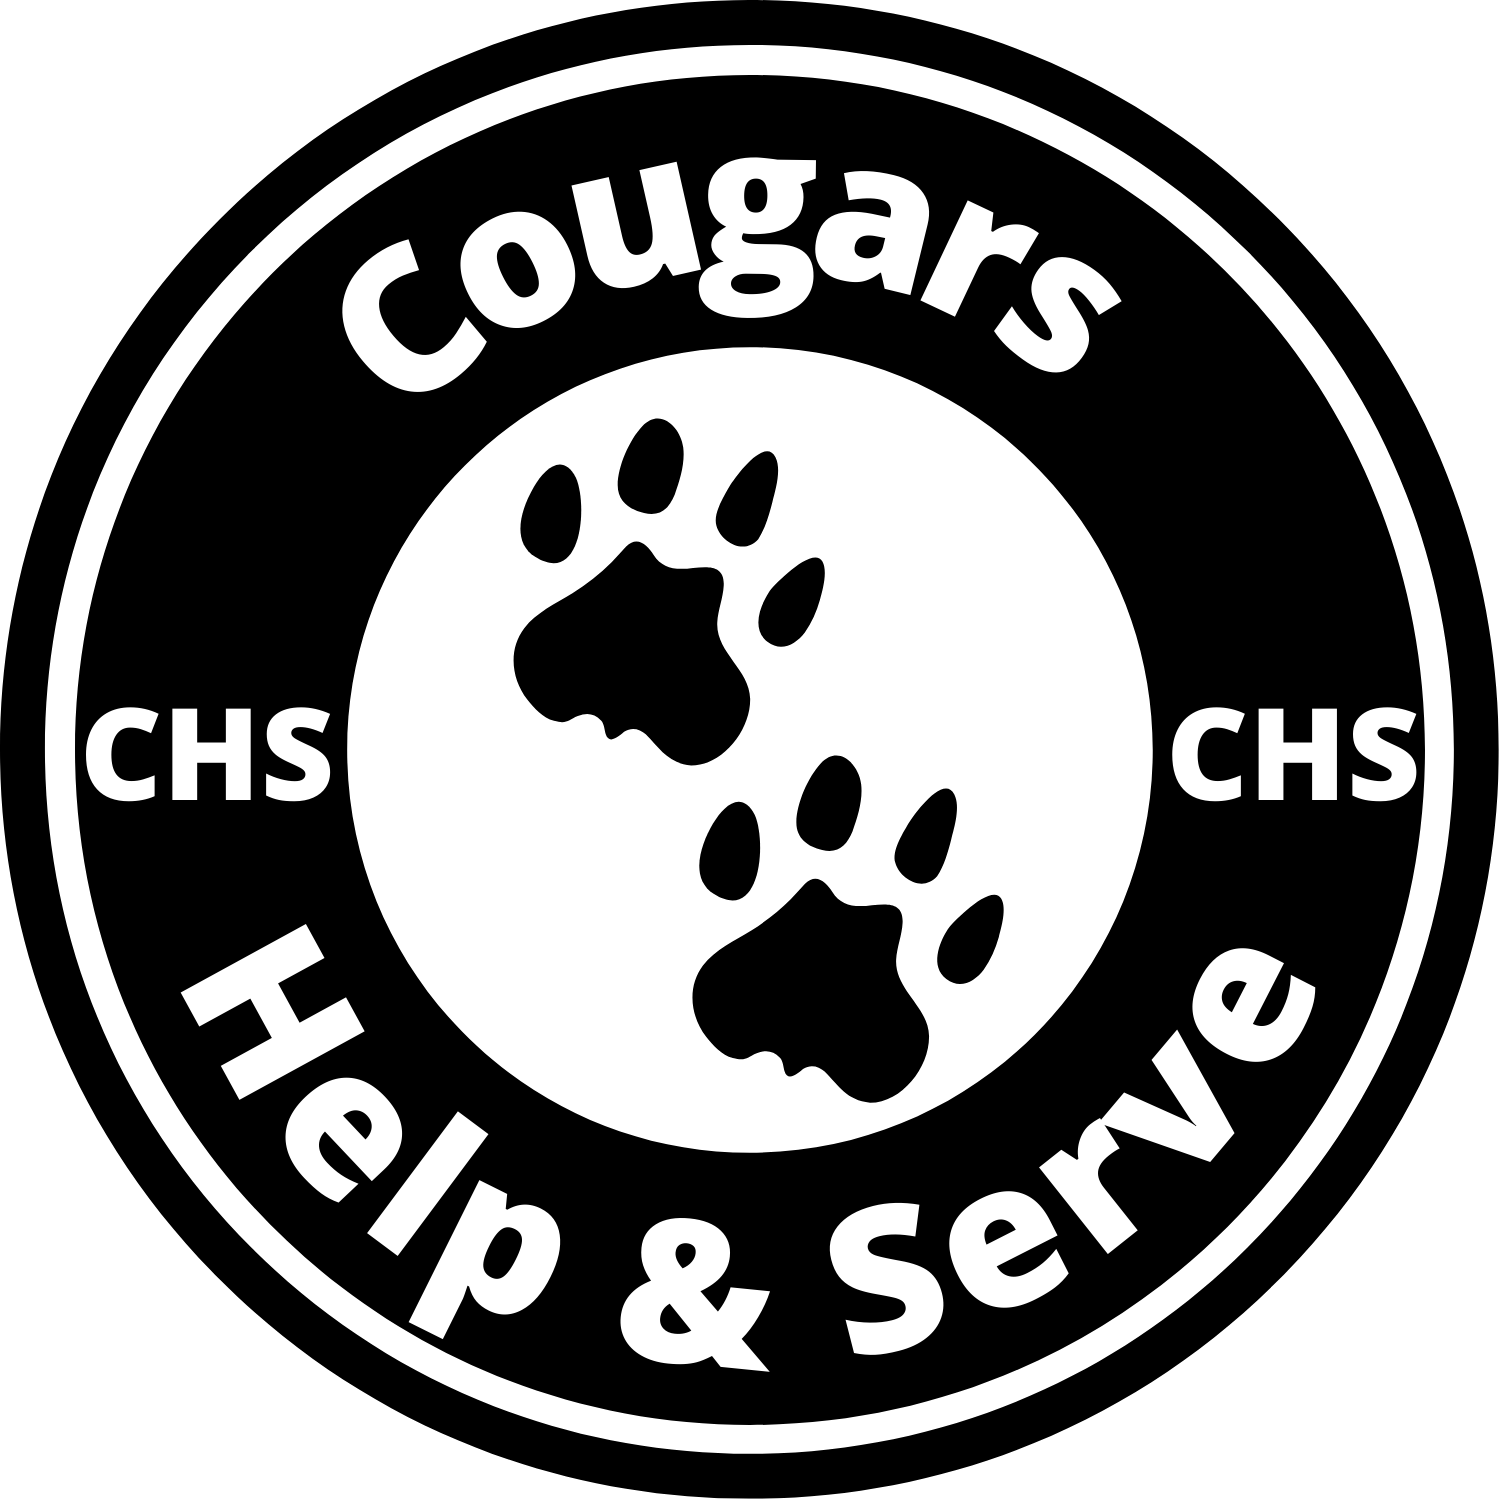 Cougars help and serve